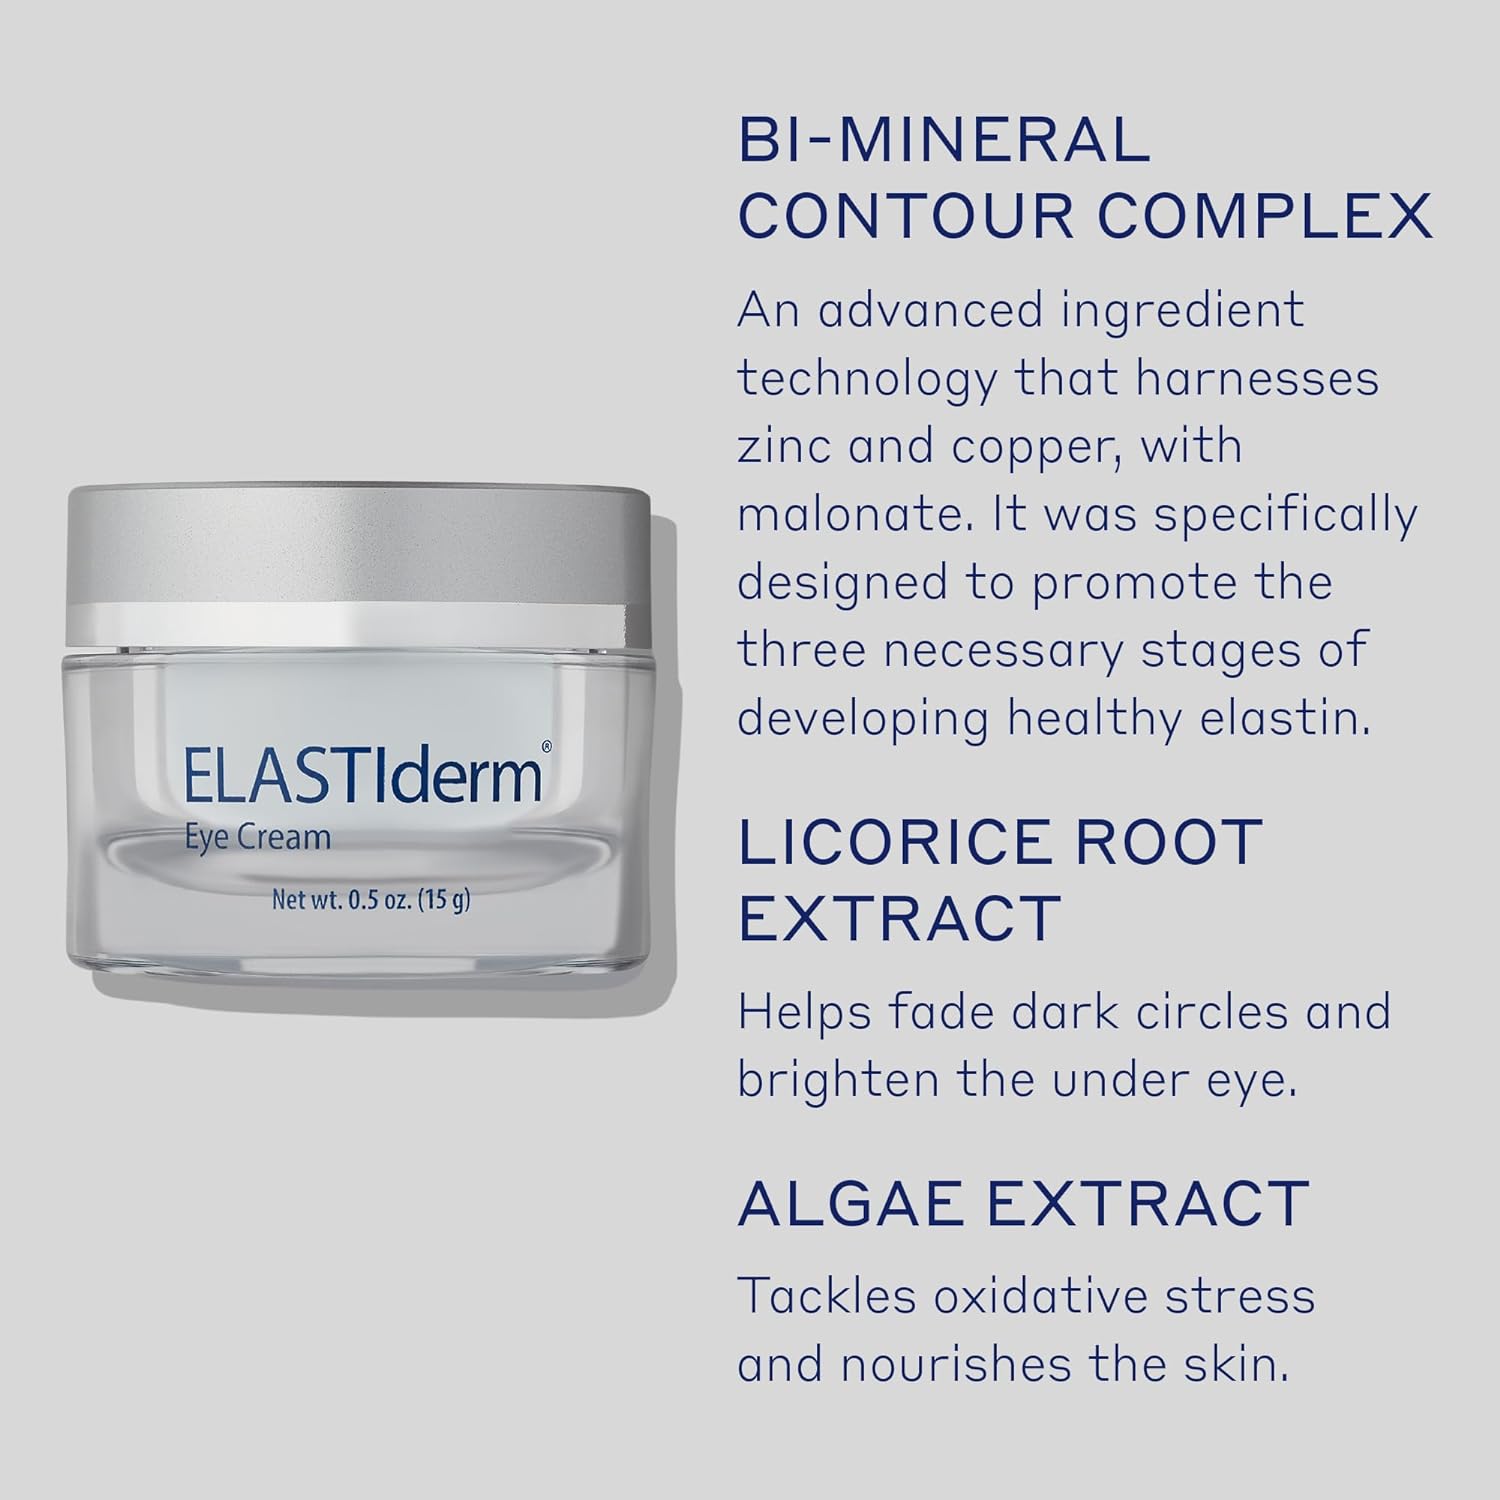 Obagi ELASTIderm Eye Cream – Lightweight, Smooth Formula Clinically Proven to Help Reduce the Appearance of Fine Lines & Wrinkles – 0.5 oz : Beauty & Personal Care